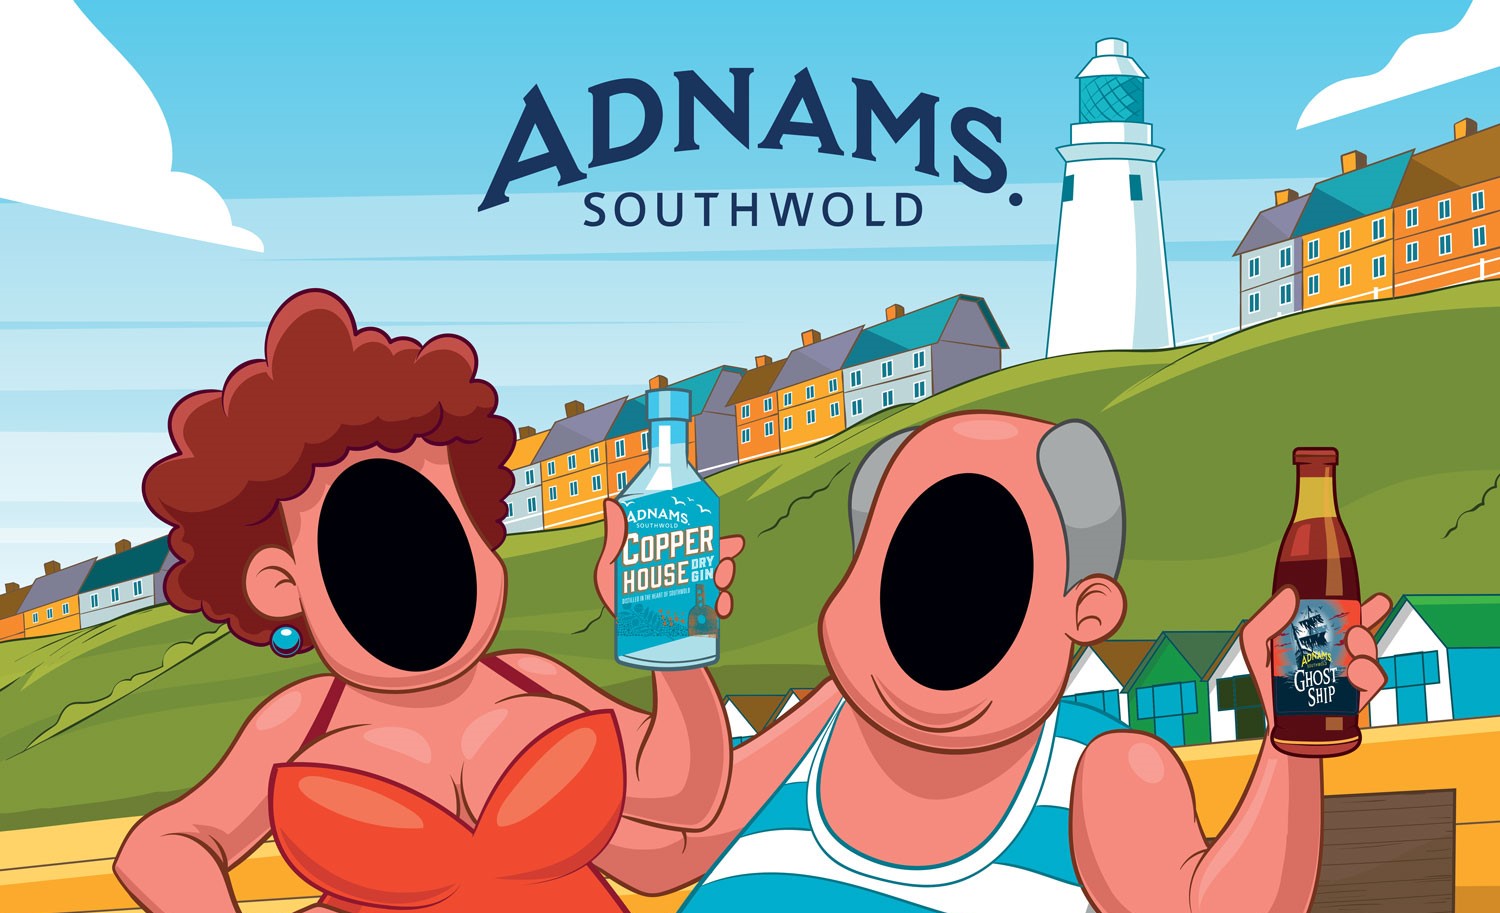 Adnams Southwold Promote their Bestselling Products with Photo CutOuts!